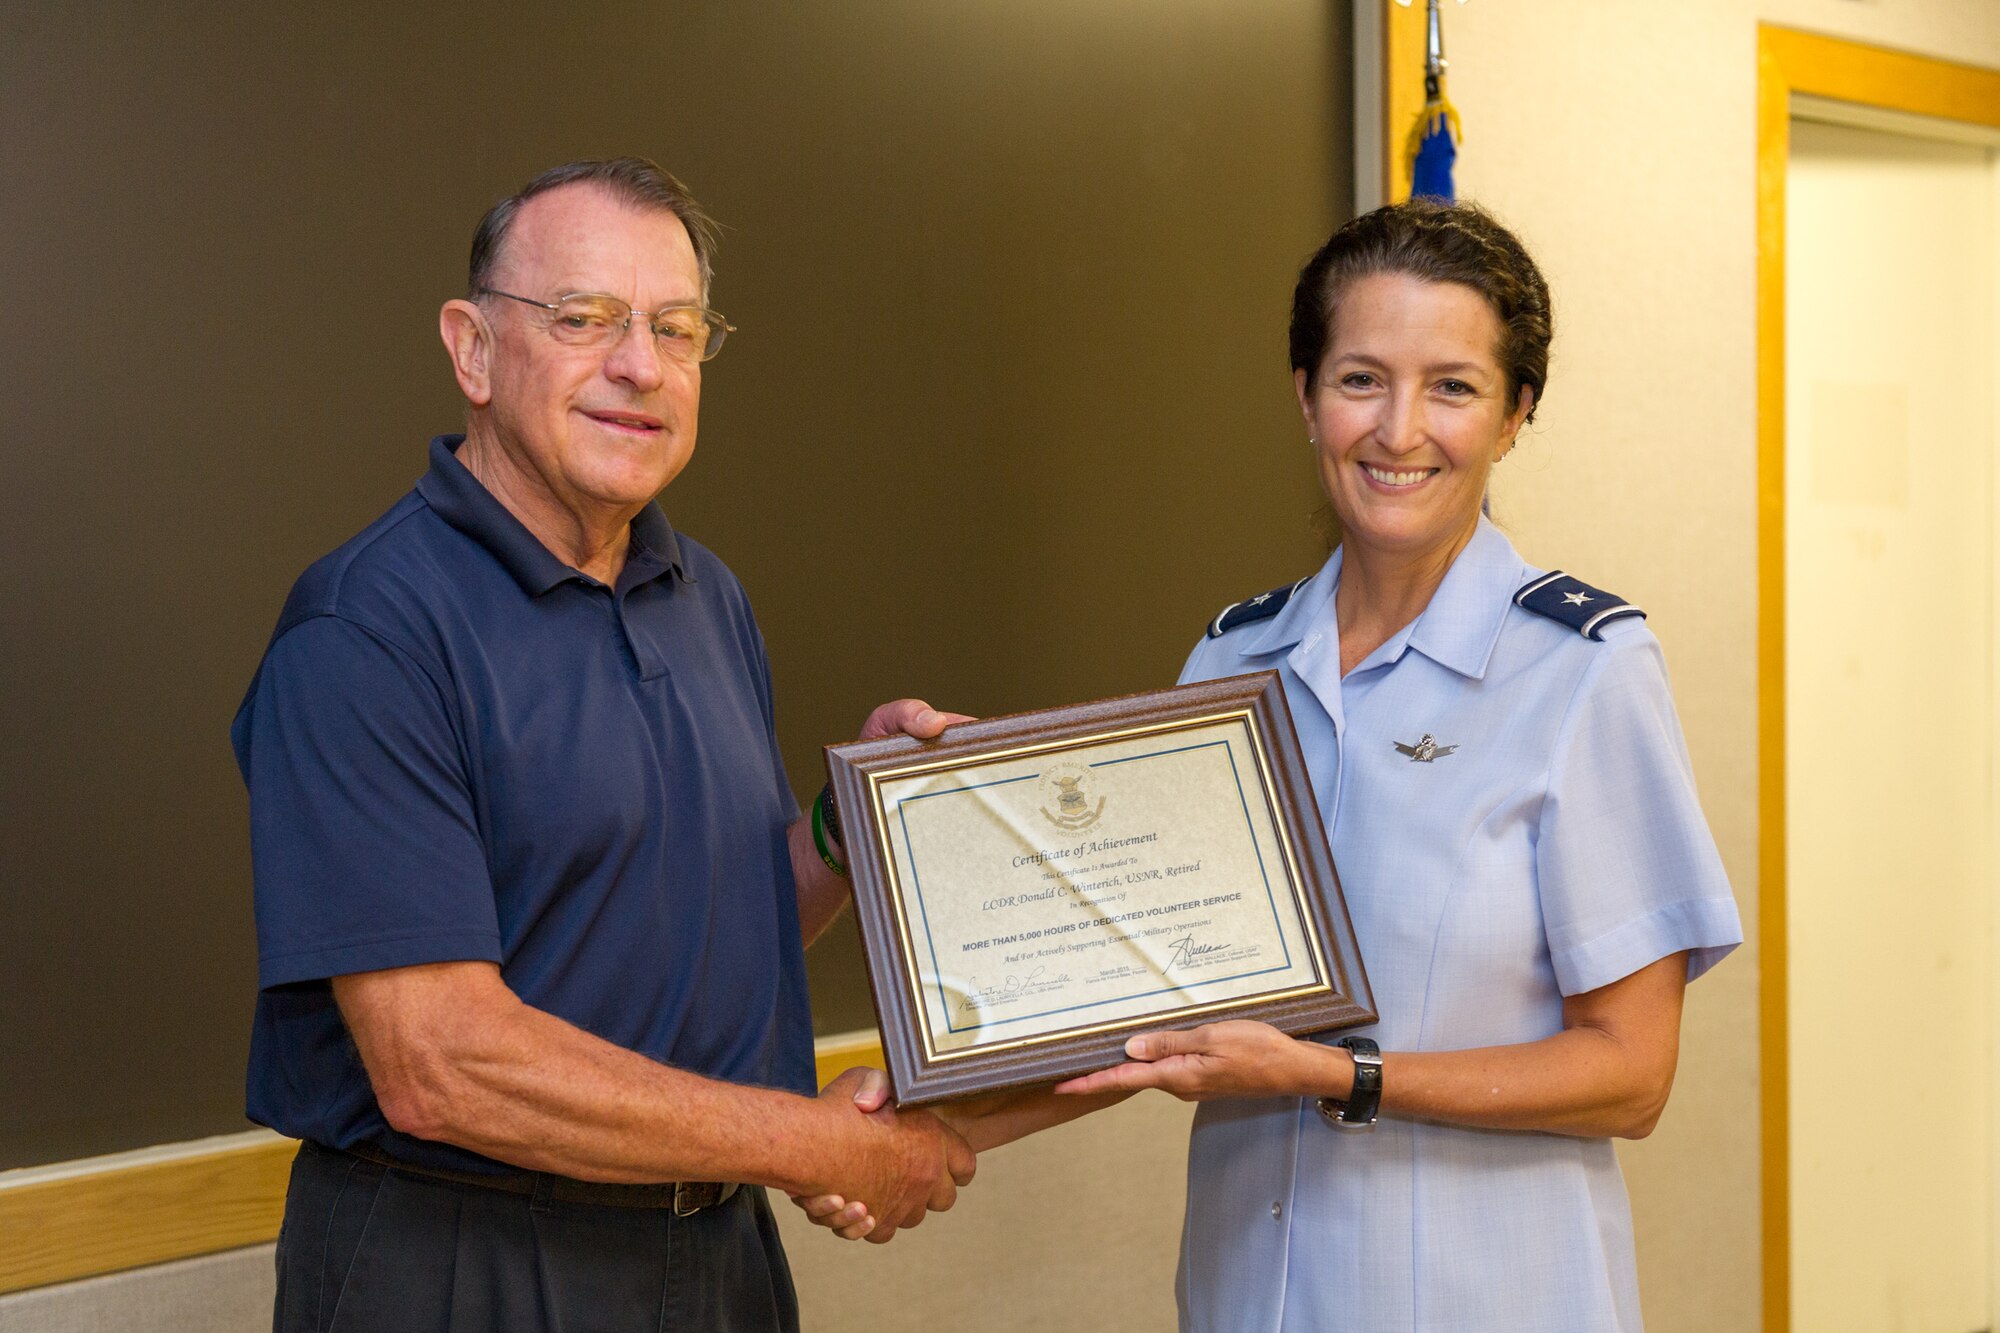 Brig. Gen. Nina Armagno, 45th Space Wing commander, presents Don Winterich, Project Emeritus volunteer and military veteran, with a Certificate of Achievement for dedicating over 5,000 hours of volunteer service, July 1, 2015, at Patrick Air Force Base, Fla. Winterich is the site coordinator of the PAFB Volunteer Income Tax Assistance (VITA) program, which has helped save over $300 thousand in tax preparation fees and had approximately $2 million in refunds. (U.S. Air Force photo/Cory Long) (Released) 
